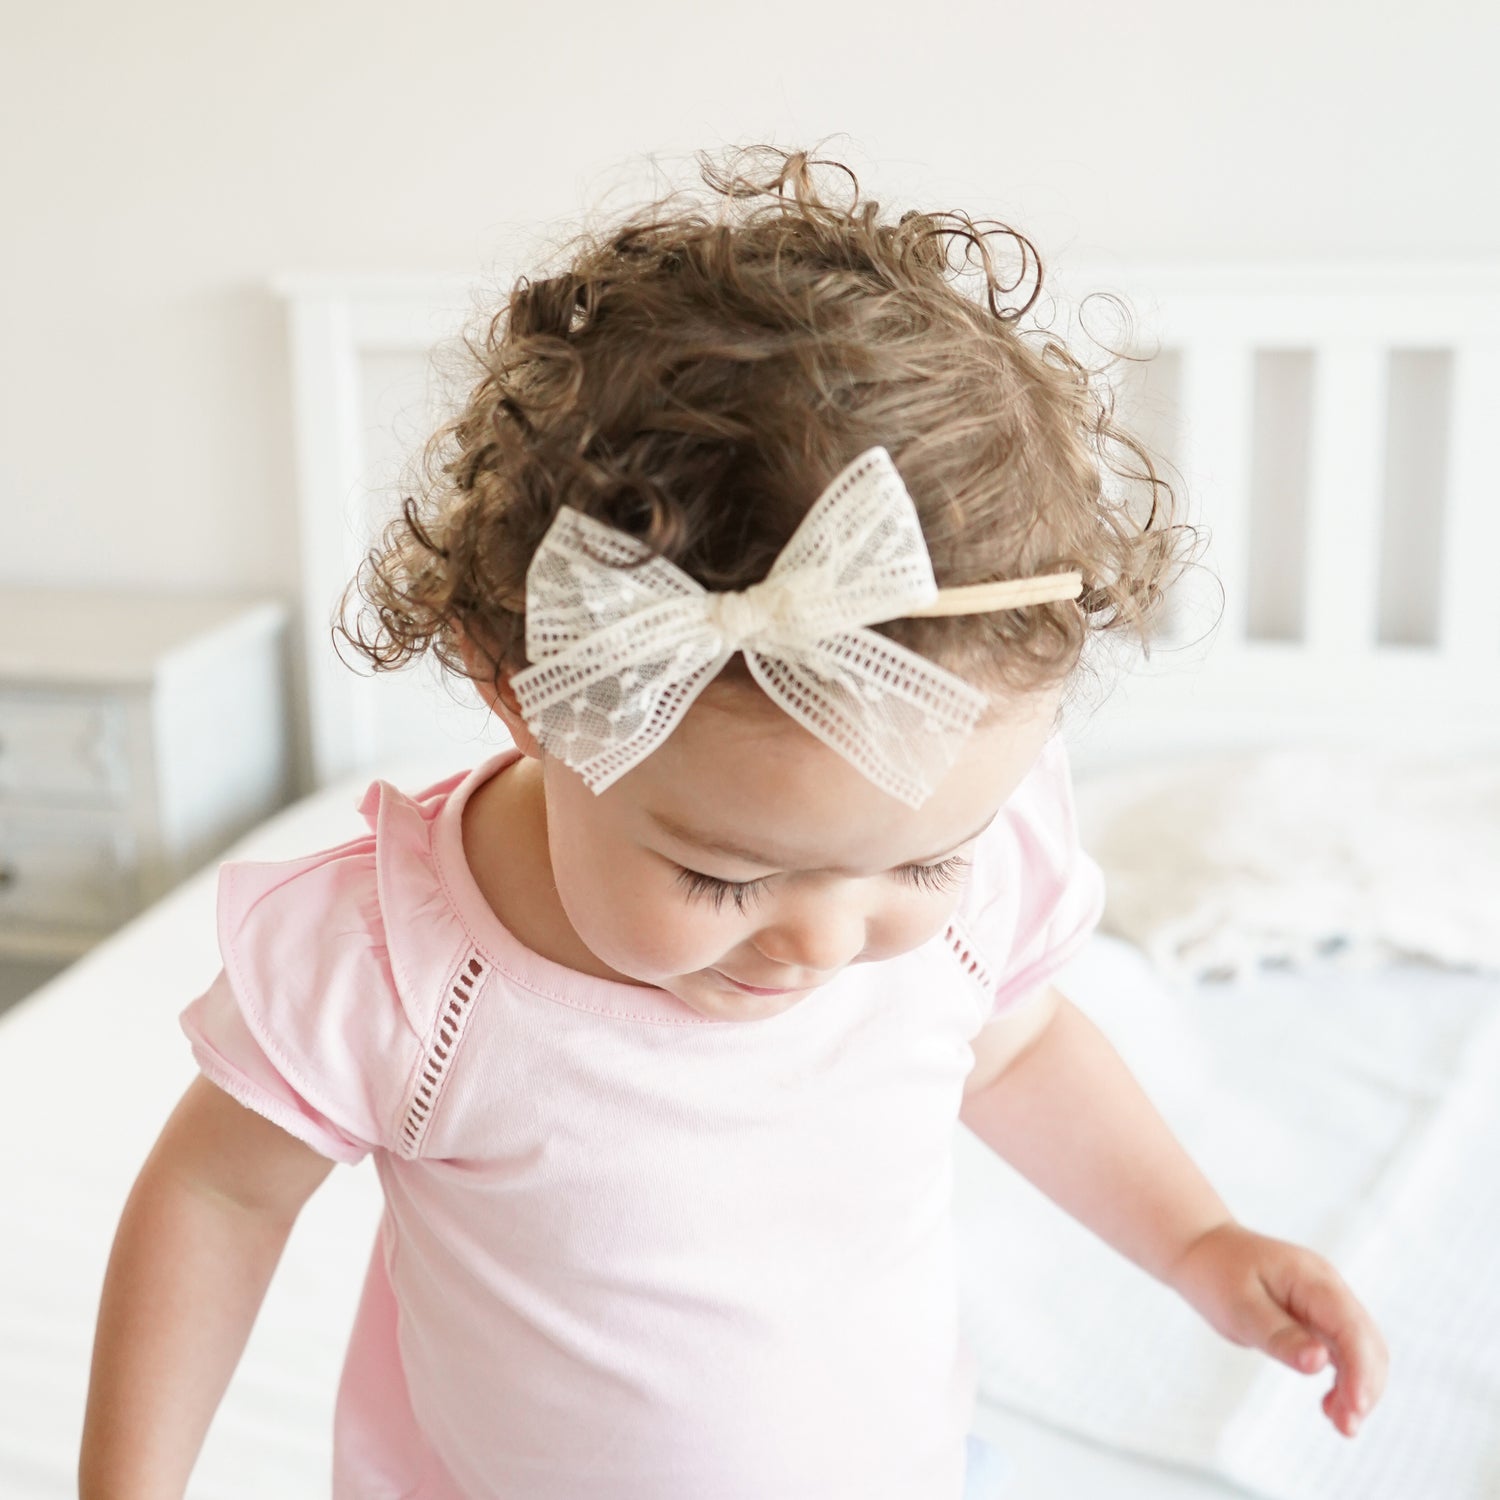 Cream ivory off white Lace headband with bow on little girl